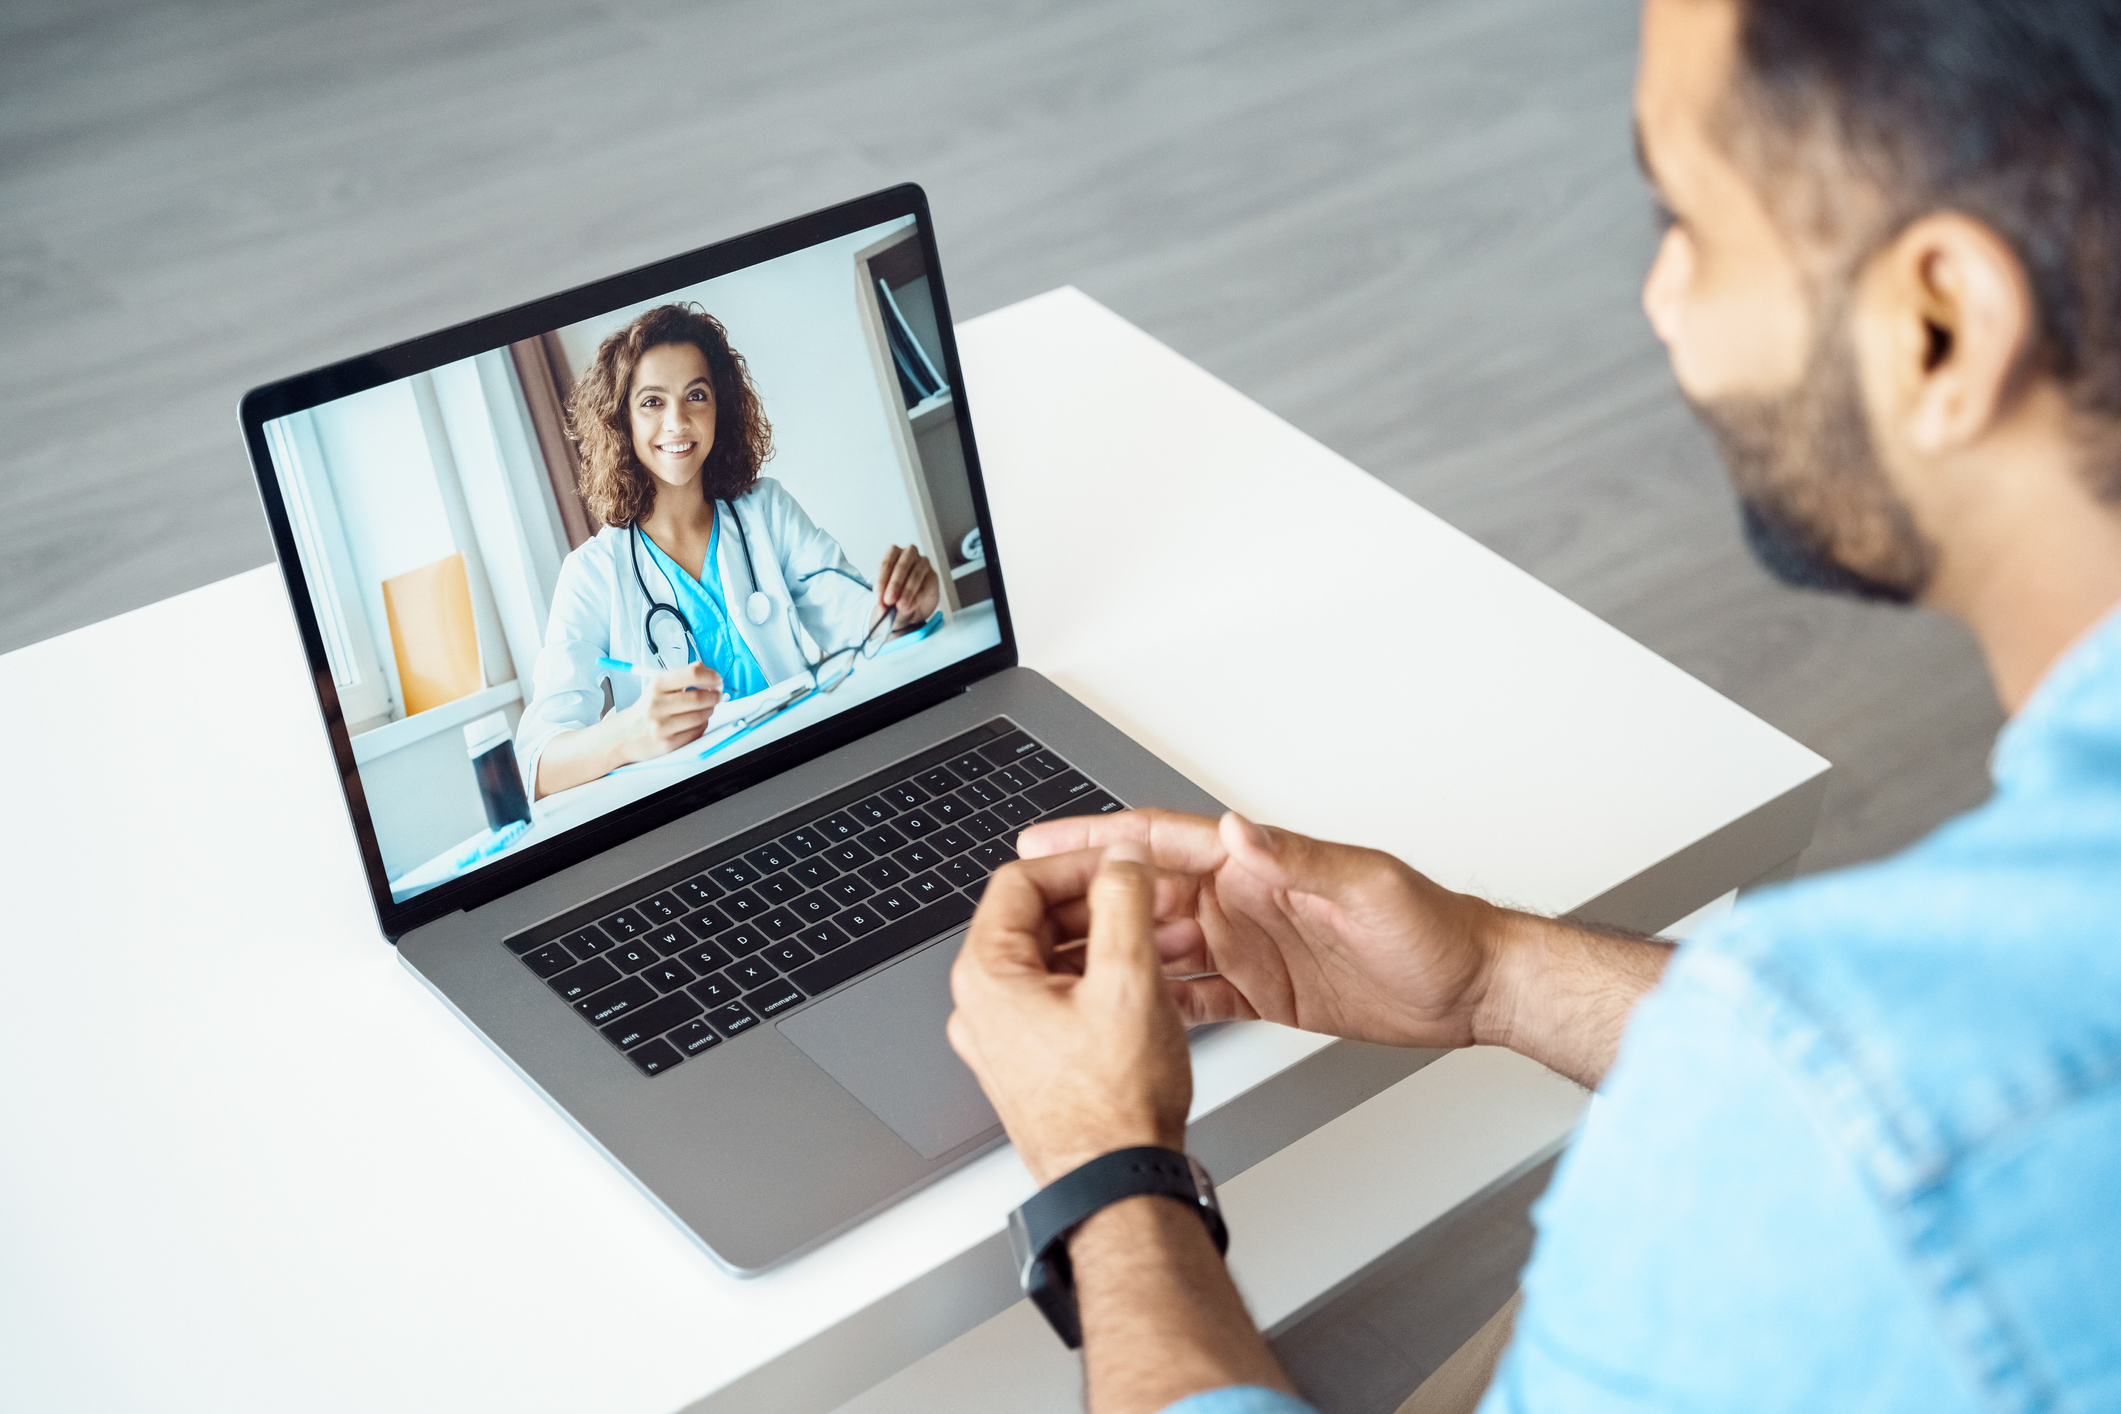 two healthcare professionals on a video call via computer